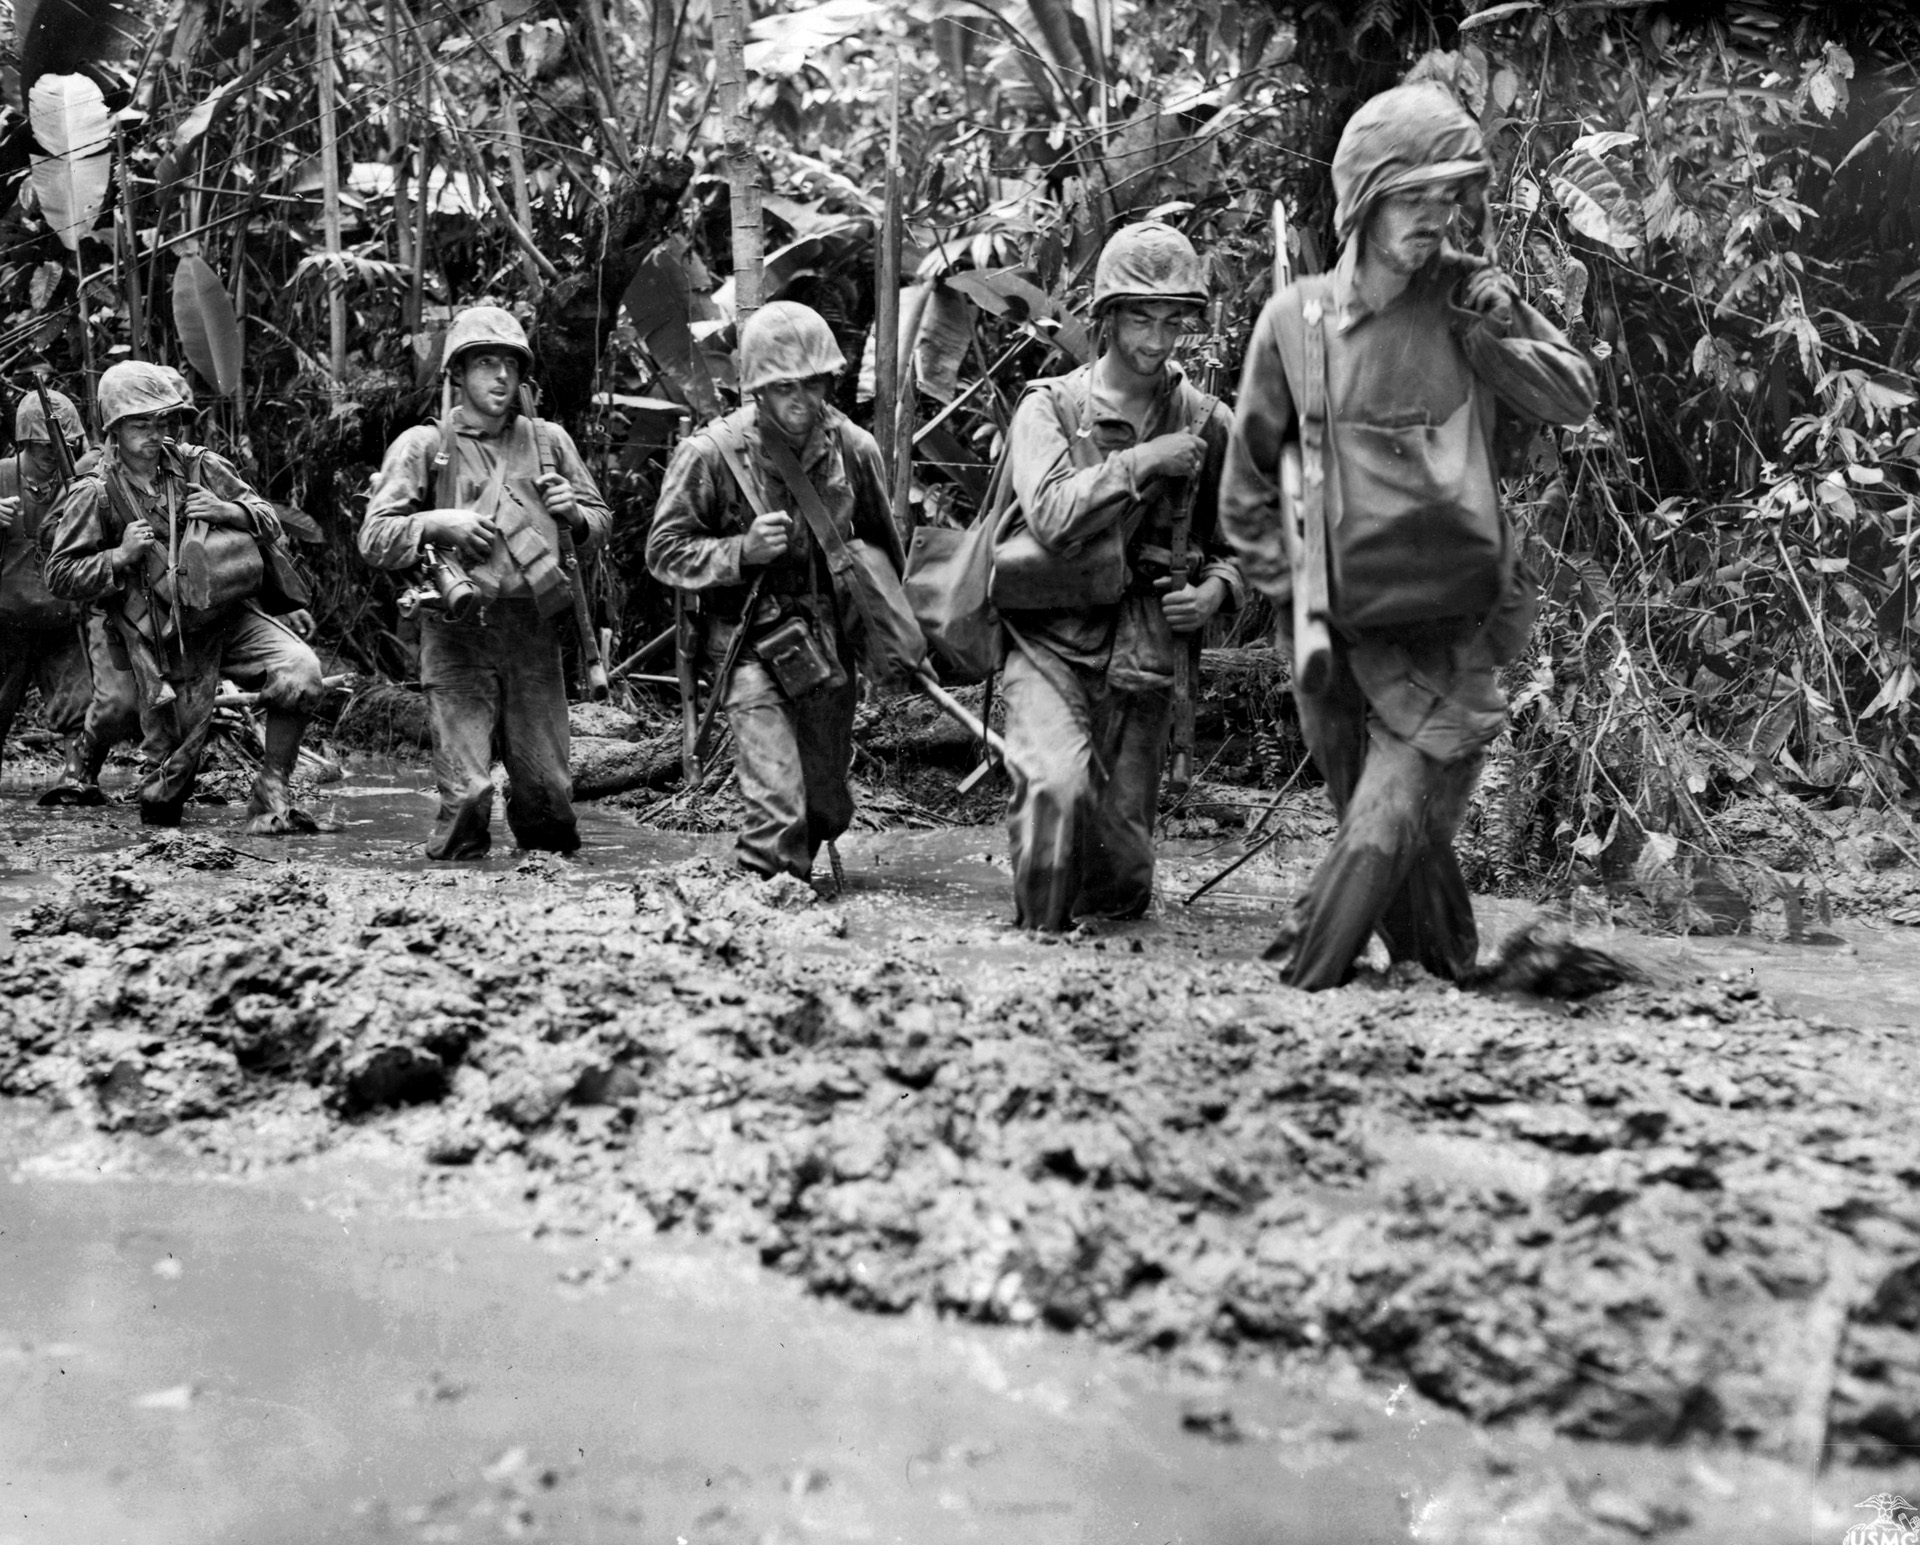 A Marine patrol slogs through knee-deep mud during the effort to wrest Bougainville from the Japanese. The island provided Marine scout Larry Kirby’s first taste of combat, and the jungle proved a difficult adversary along with the Japanese.